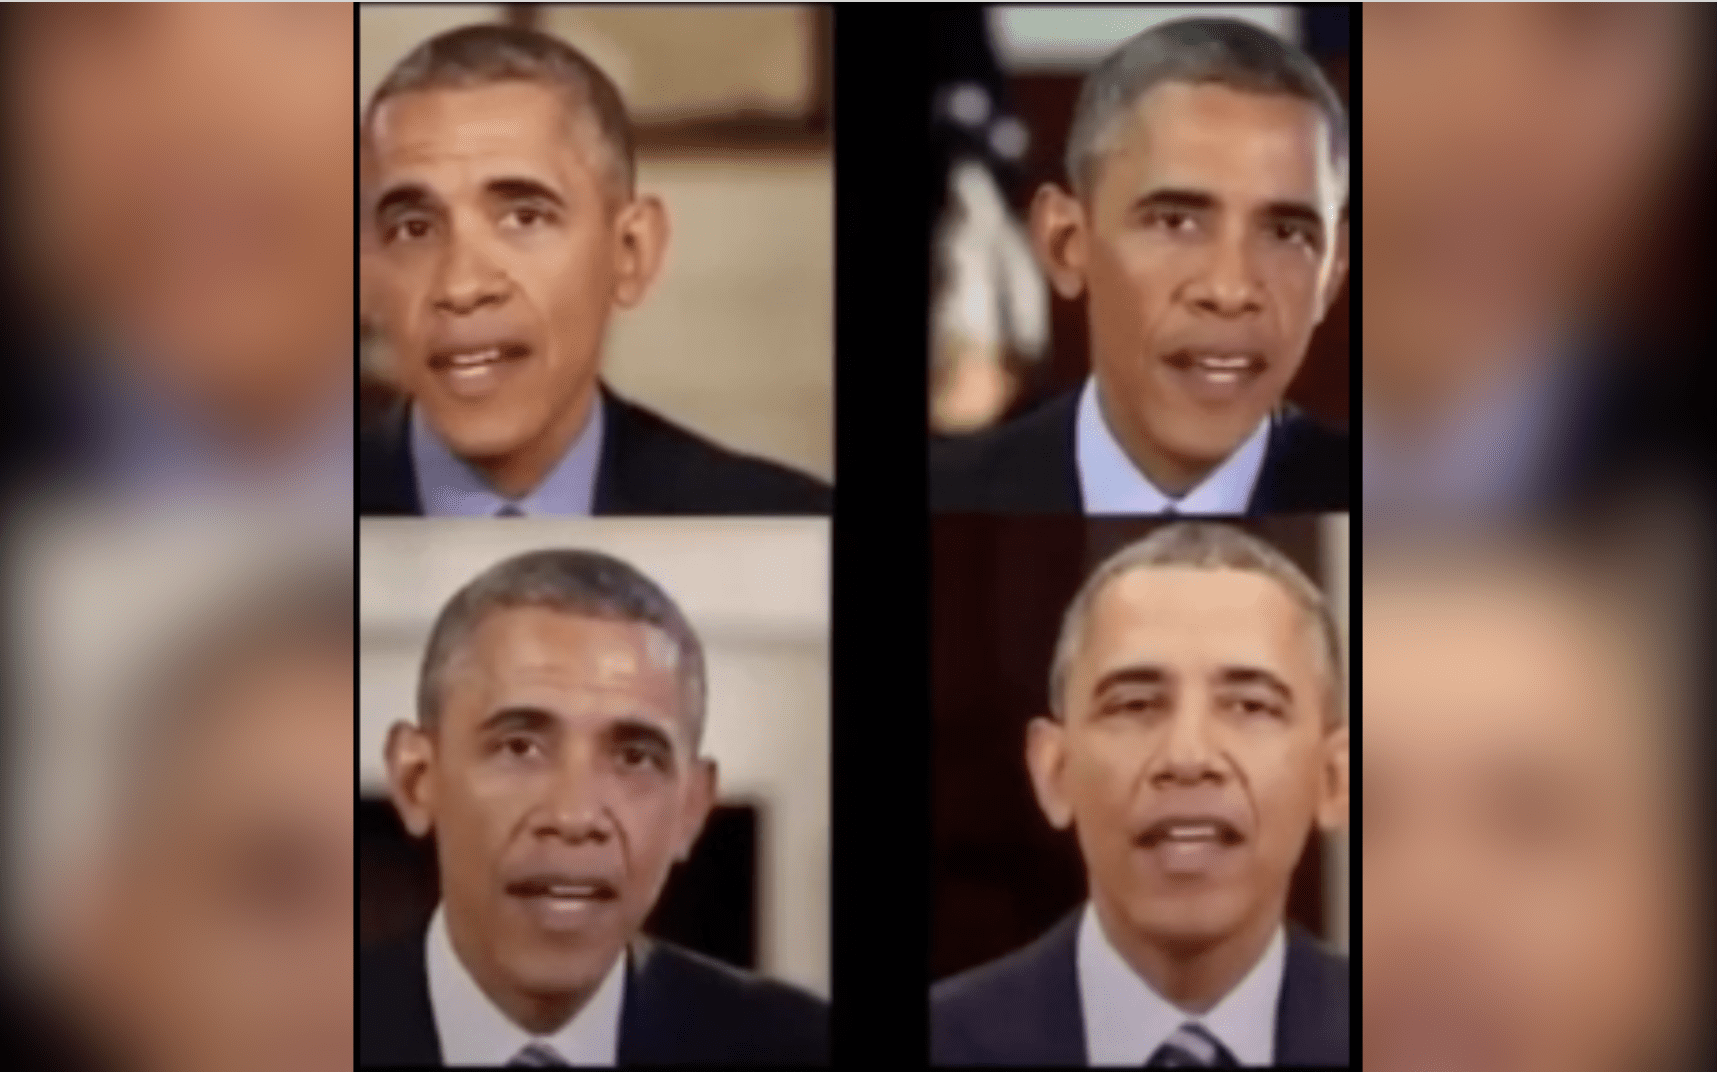 DEEP FAKED: Can You Tell Which Obama Is Real?